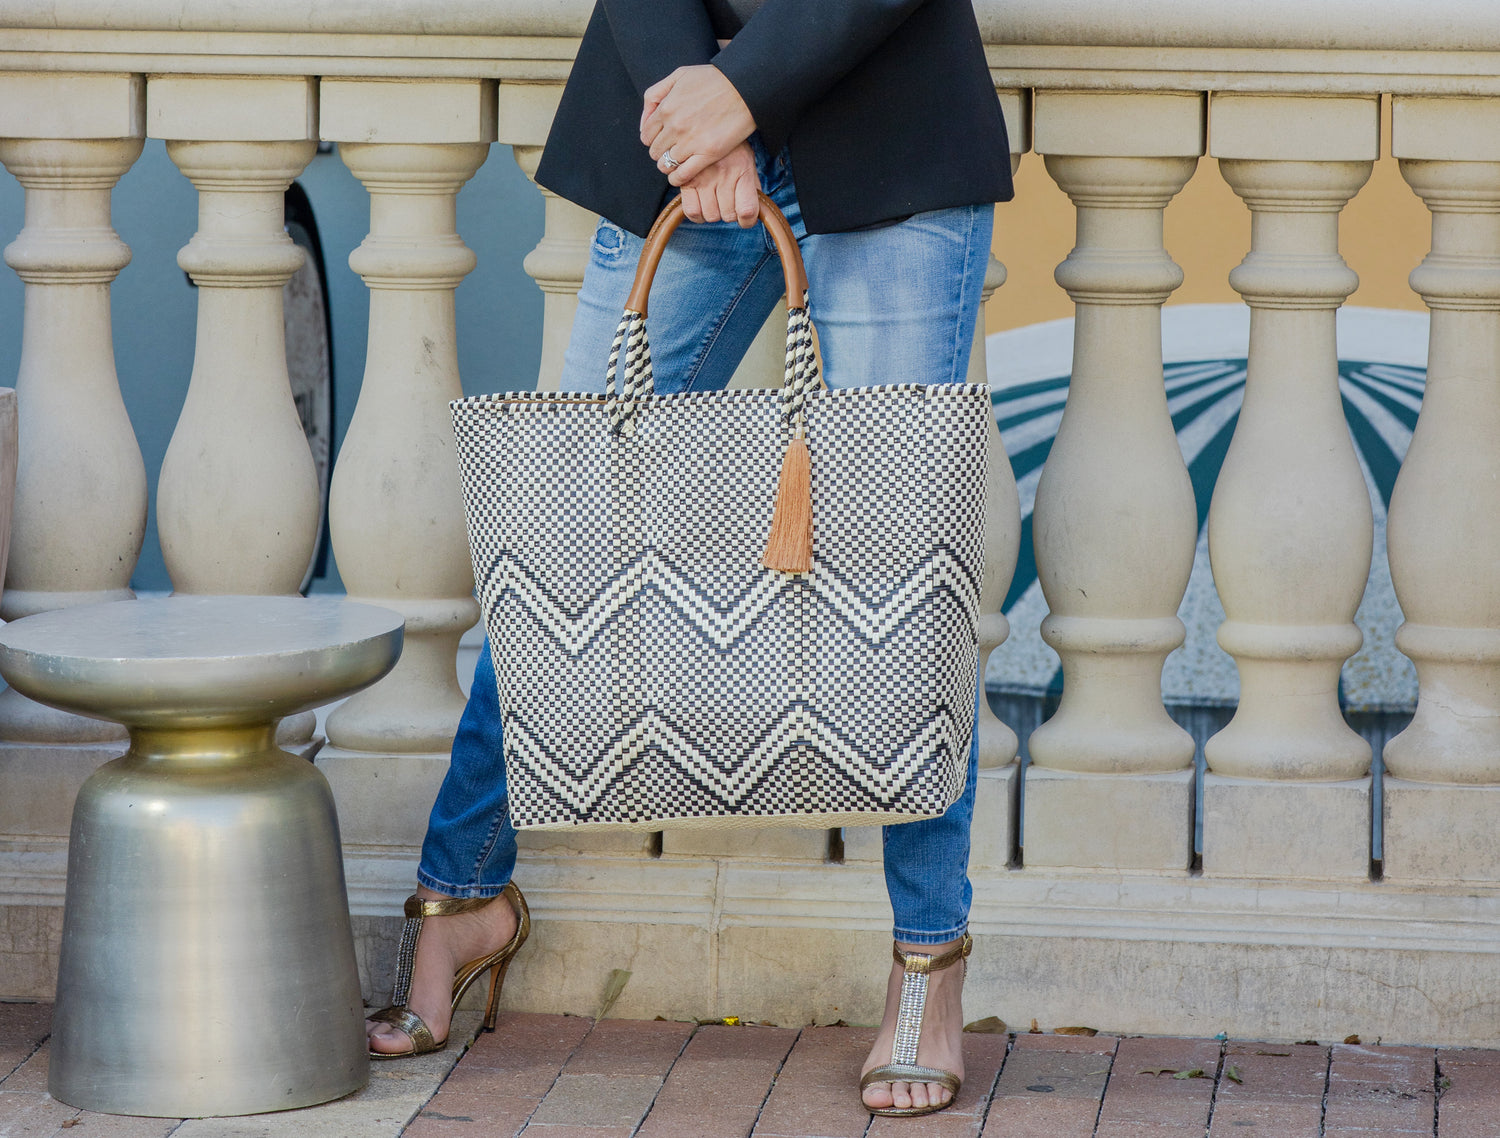 Woman wearing jeans and black blazer holding woven black and white chevron bag